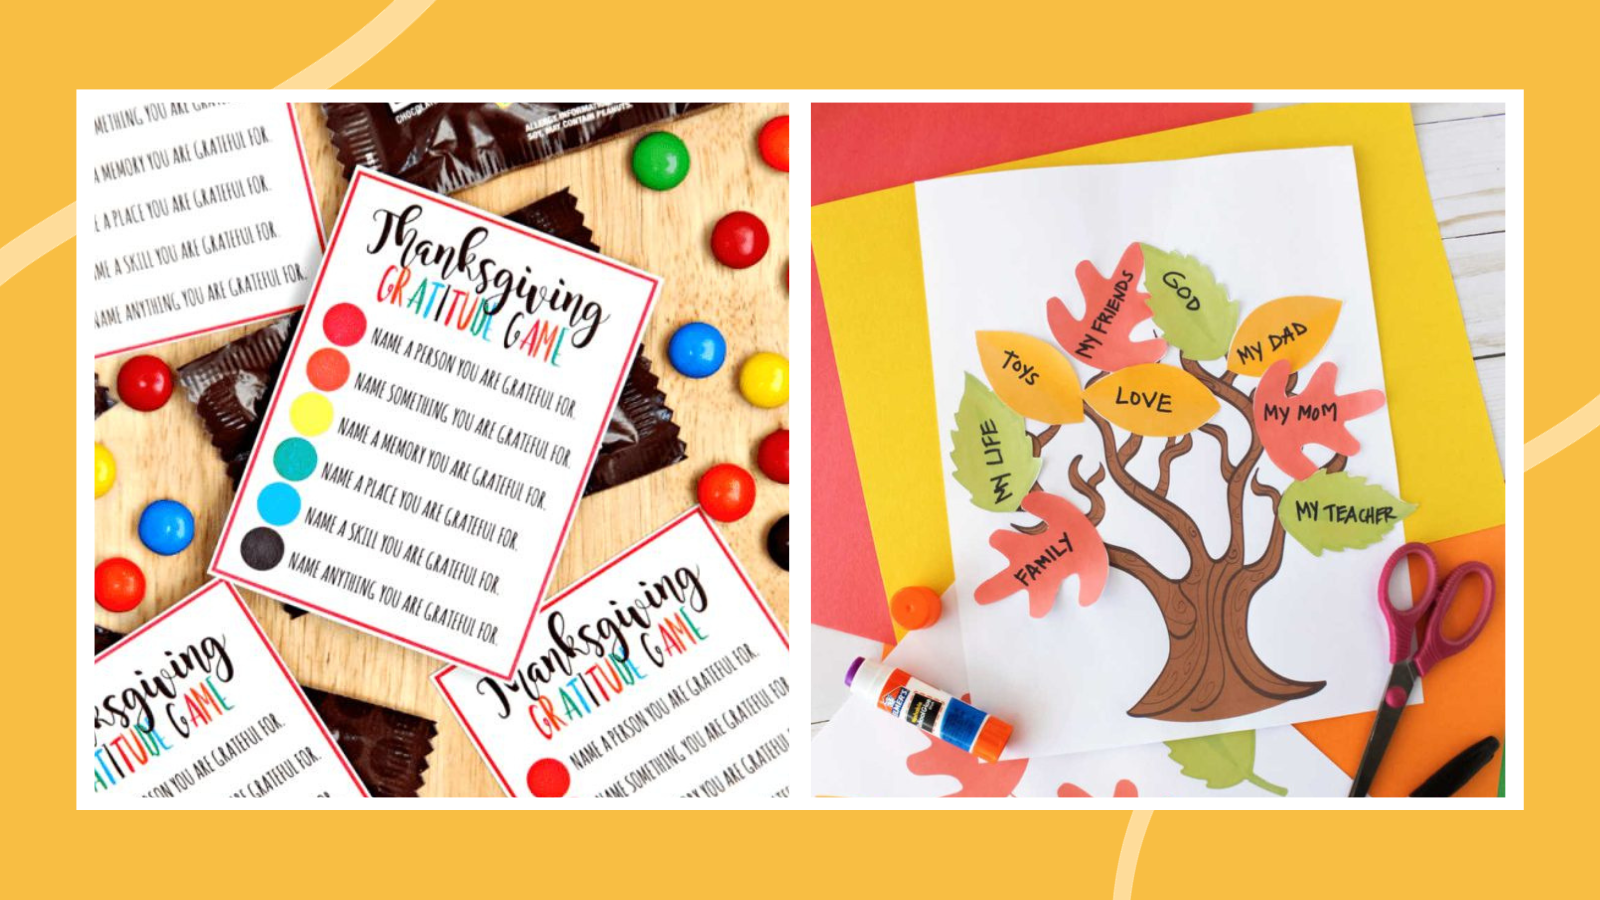 Examples of meaningful gratitude activities for kids, including M&M Gratitude Game and gratitude tree art project.